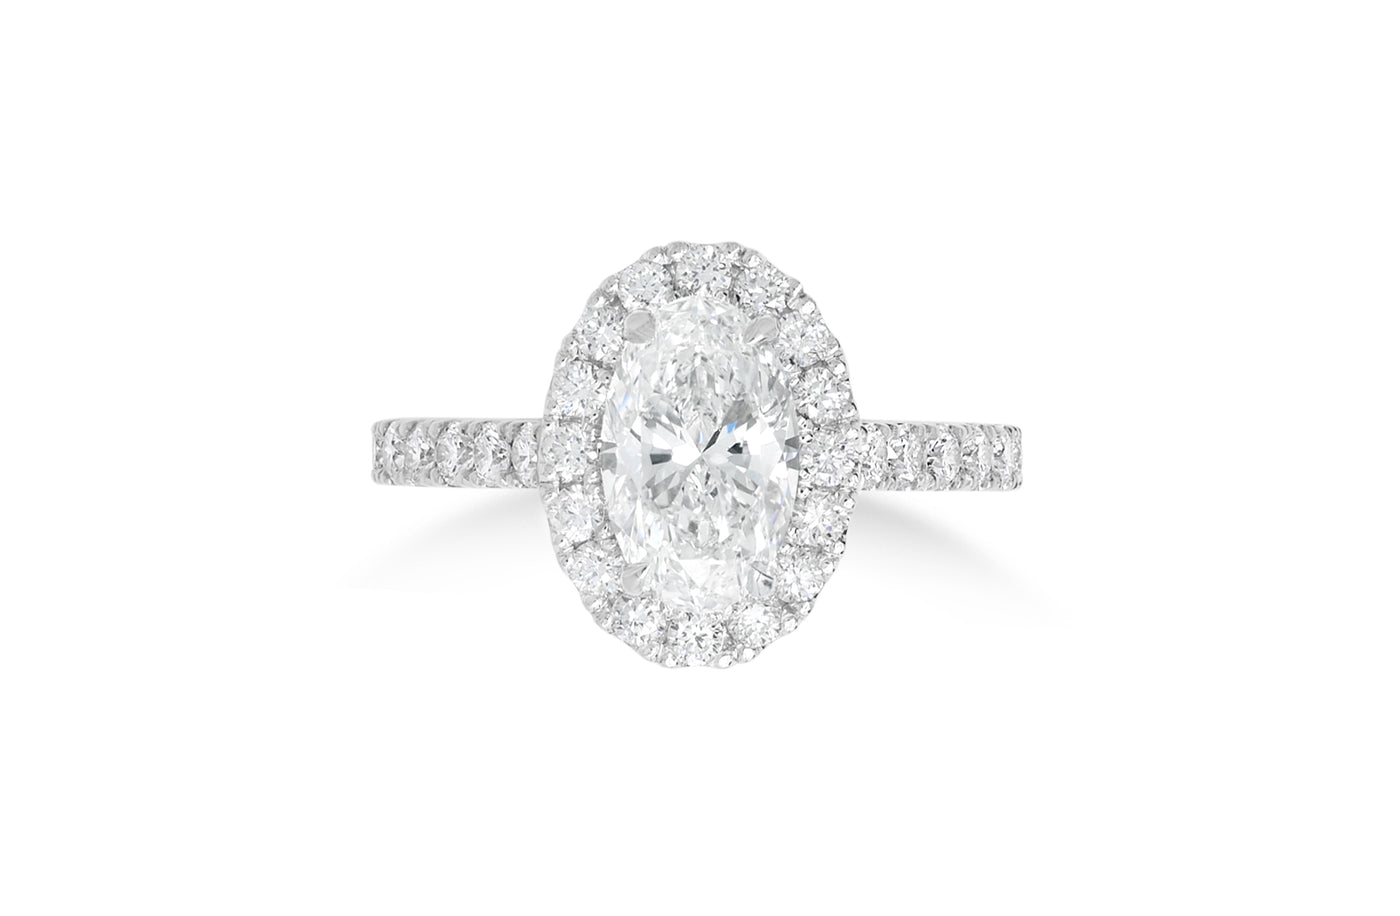 Adorn: Oval Cut Diamond Halo Ring with Diamond Set Band in White Gold or Platinum